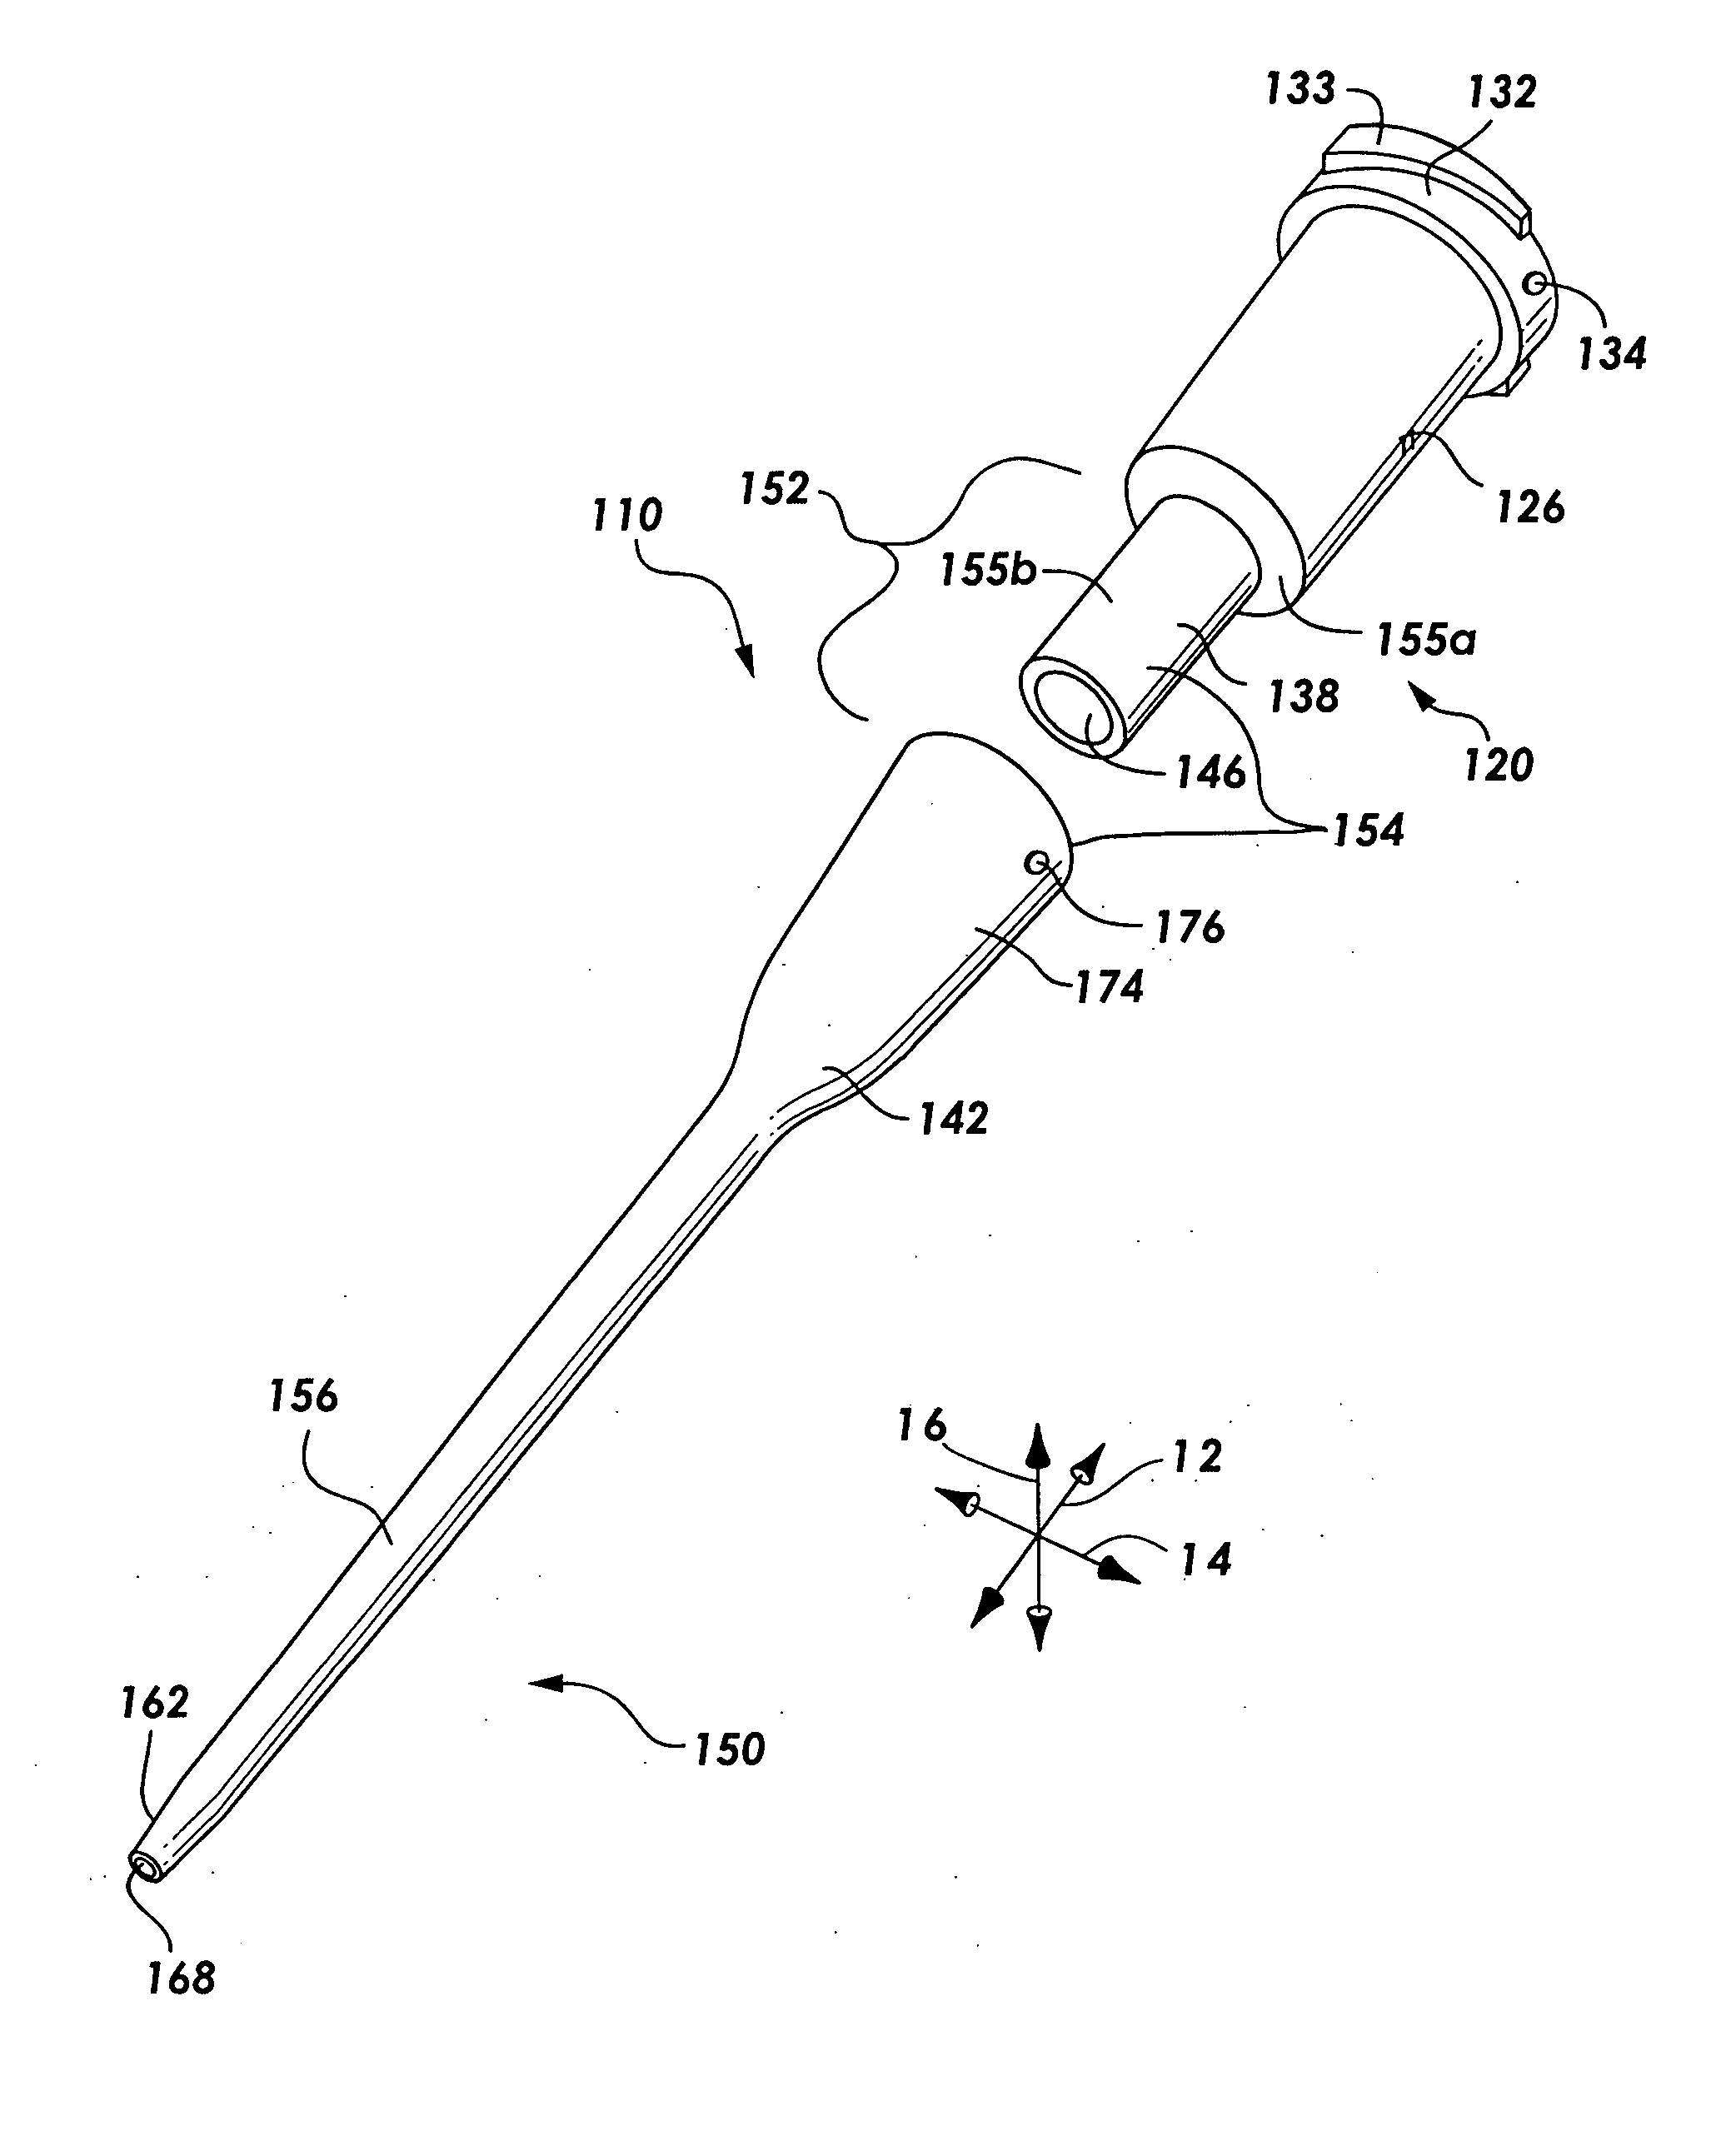 Catheter assemblies and injection molding processes and equipment for making the same